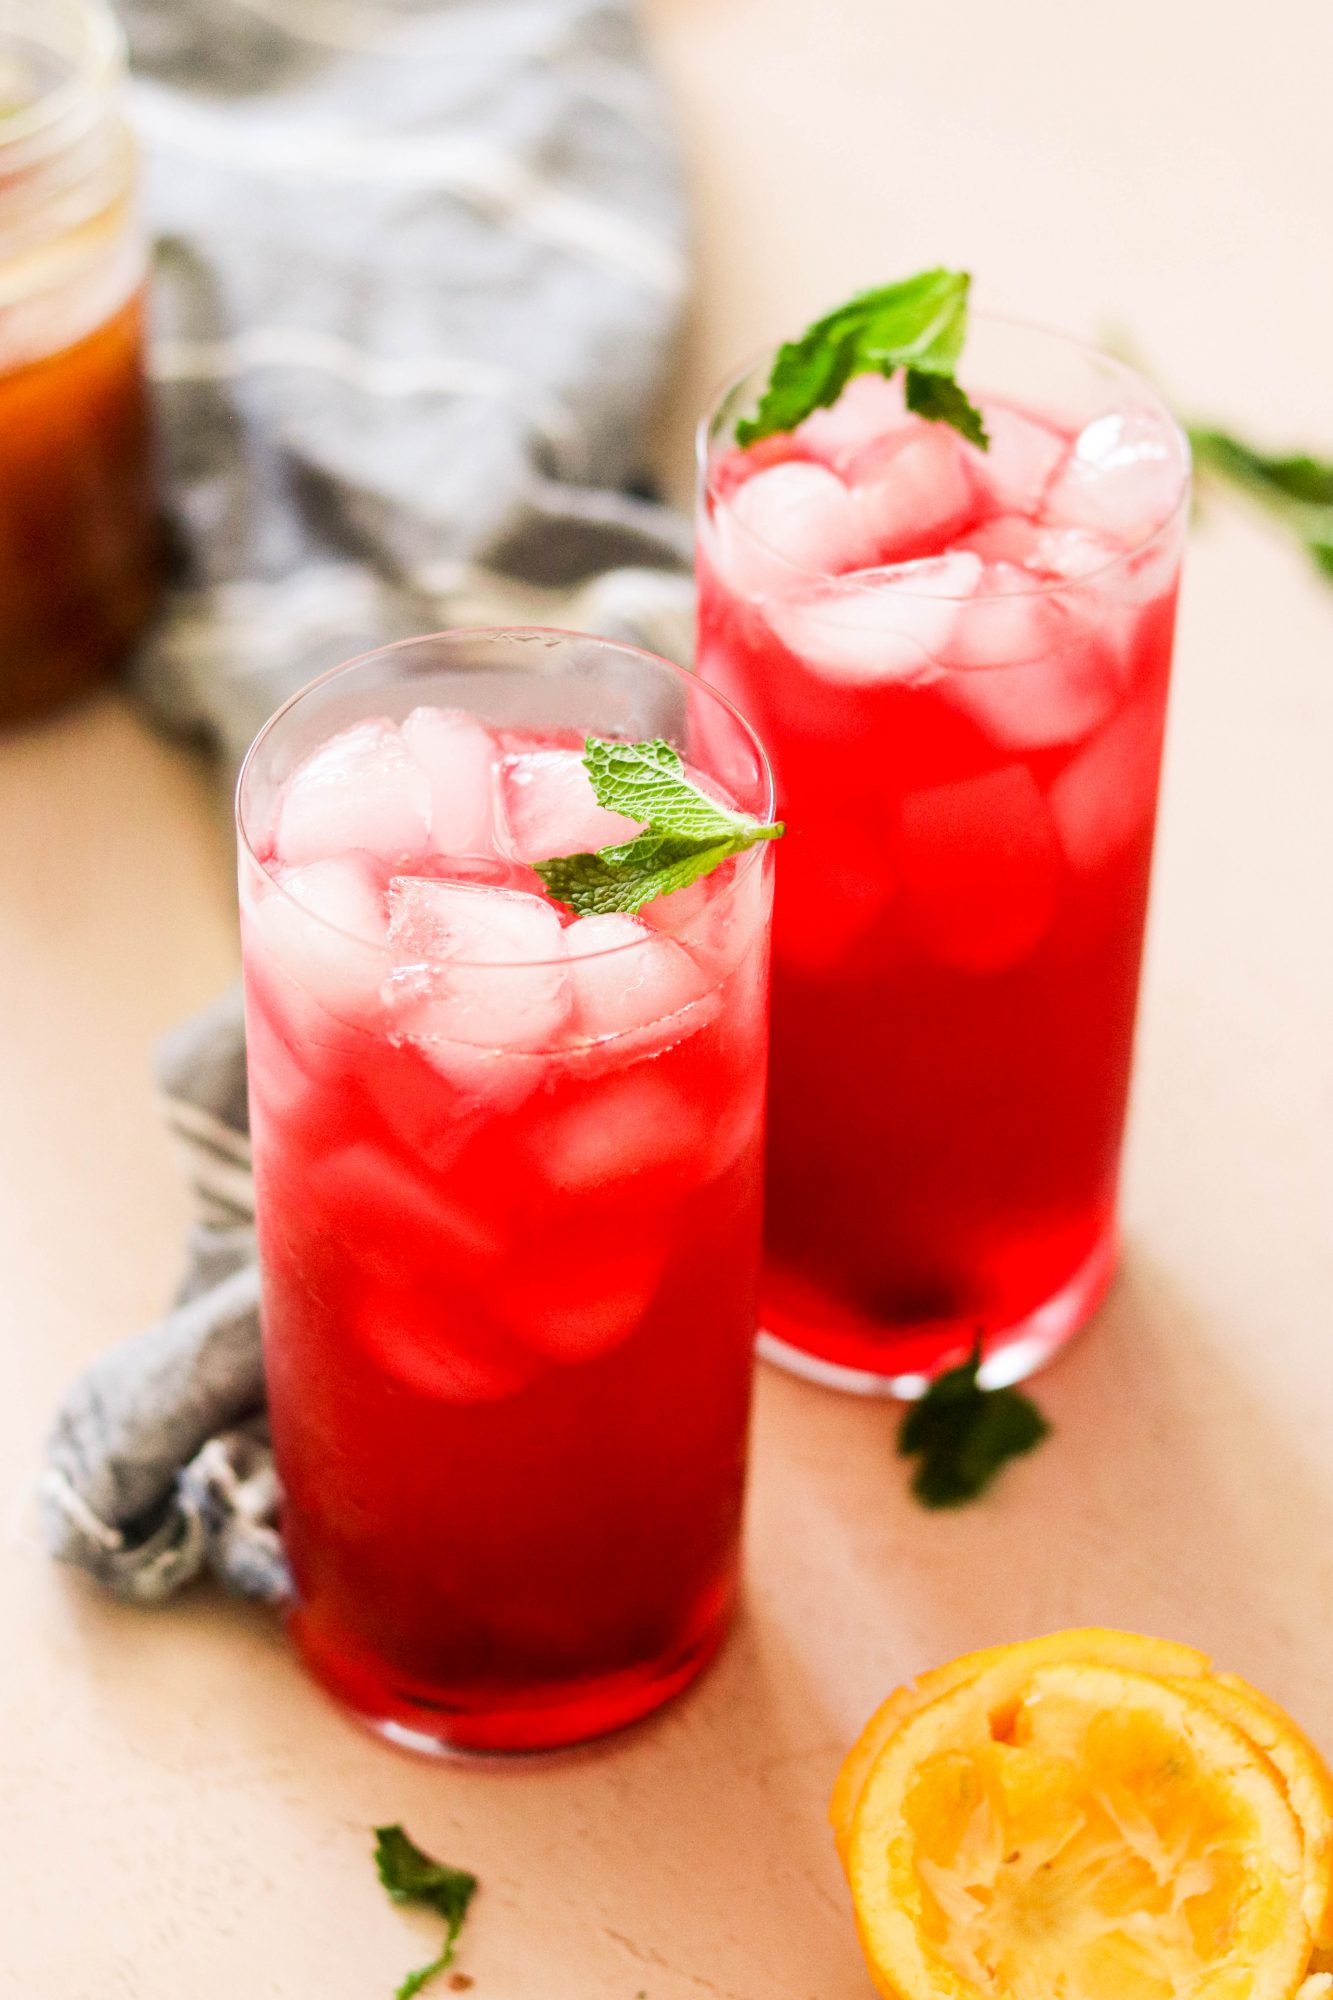 homemade lemonade with honey and hibiscus poured into glasses garnished with mint leaves